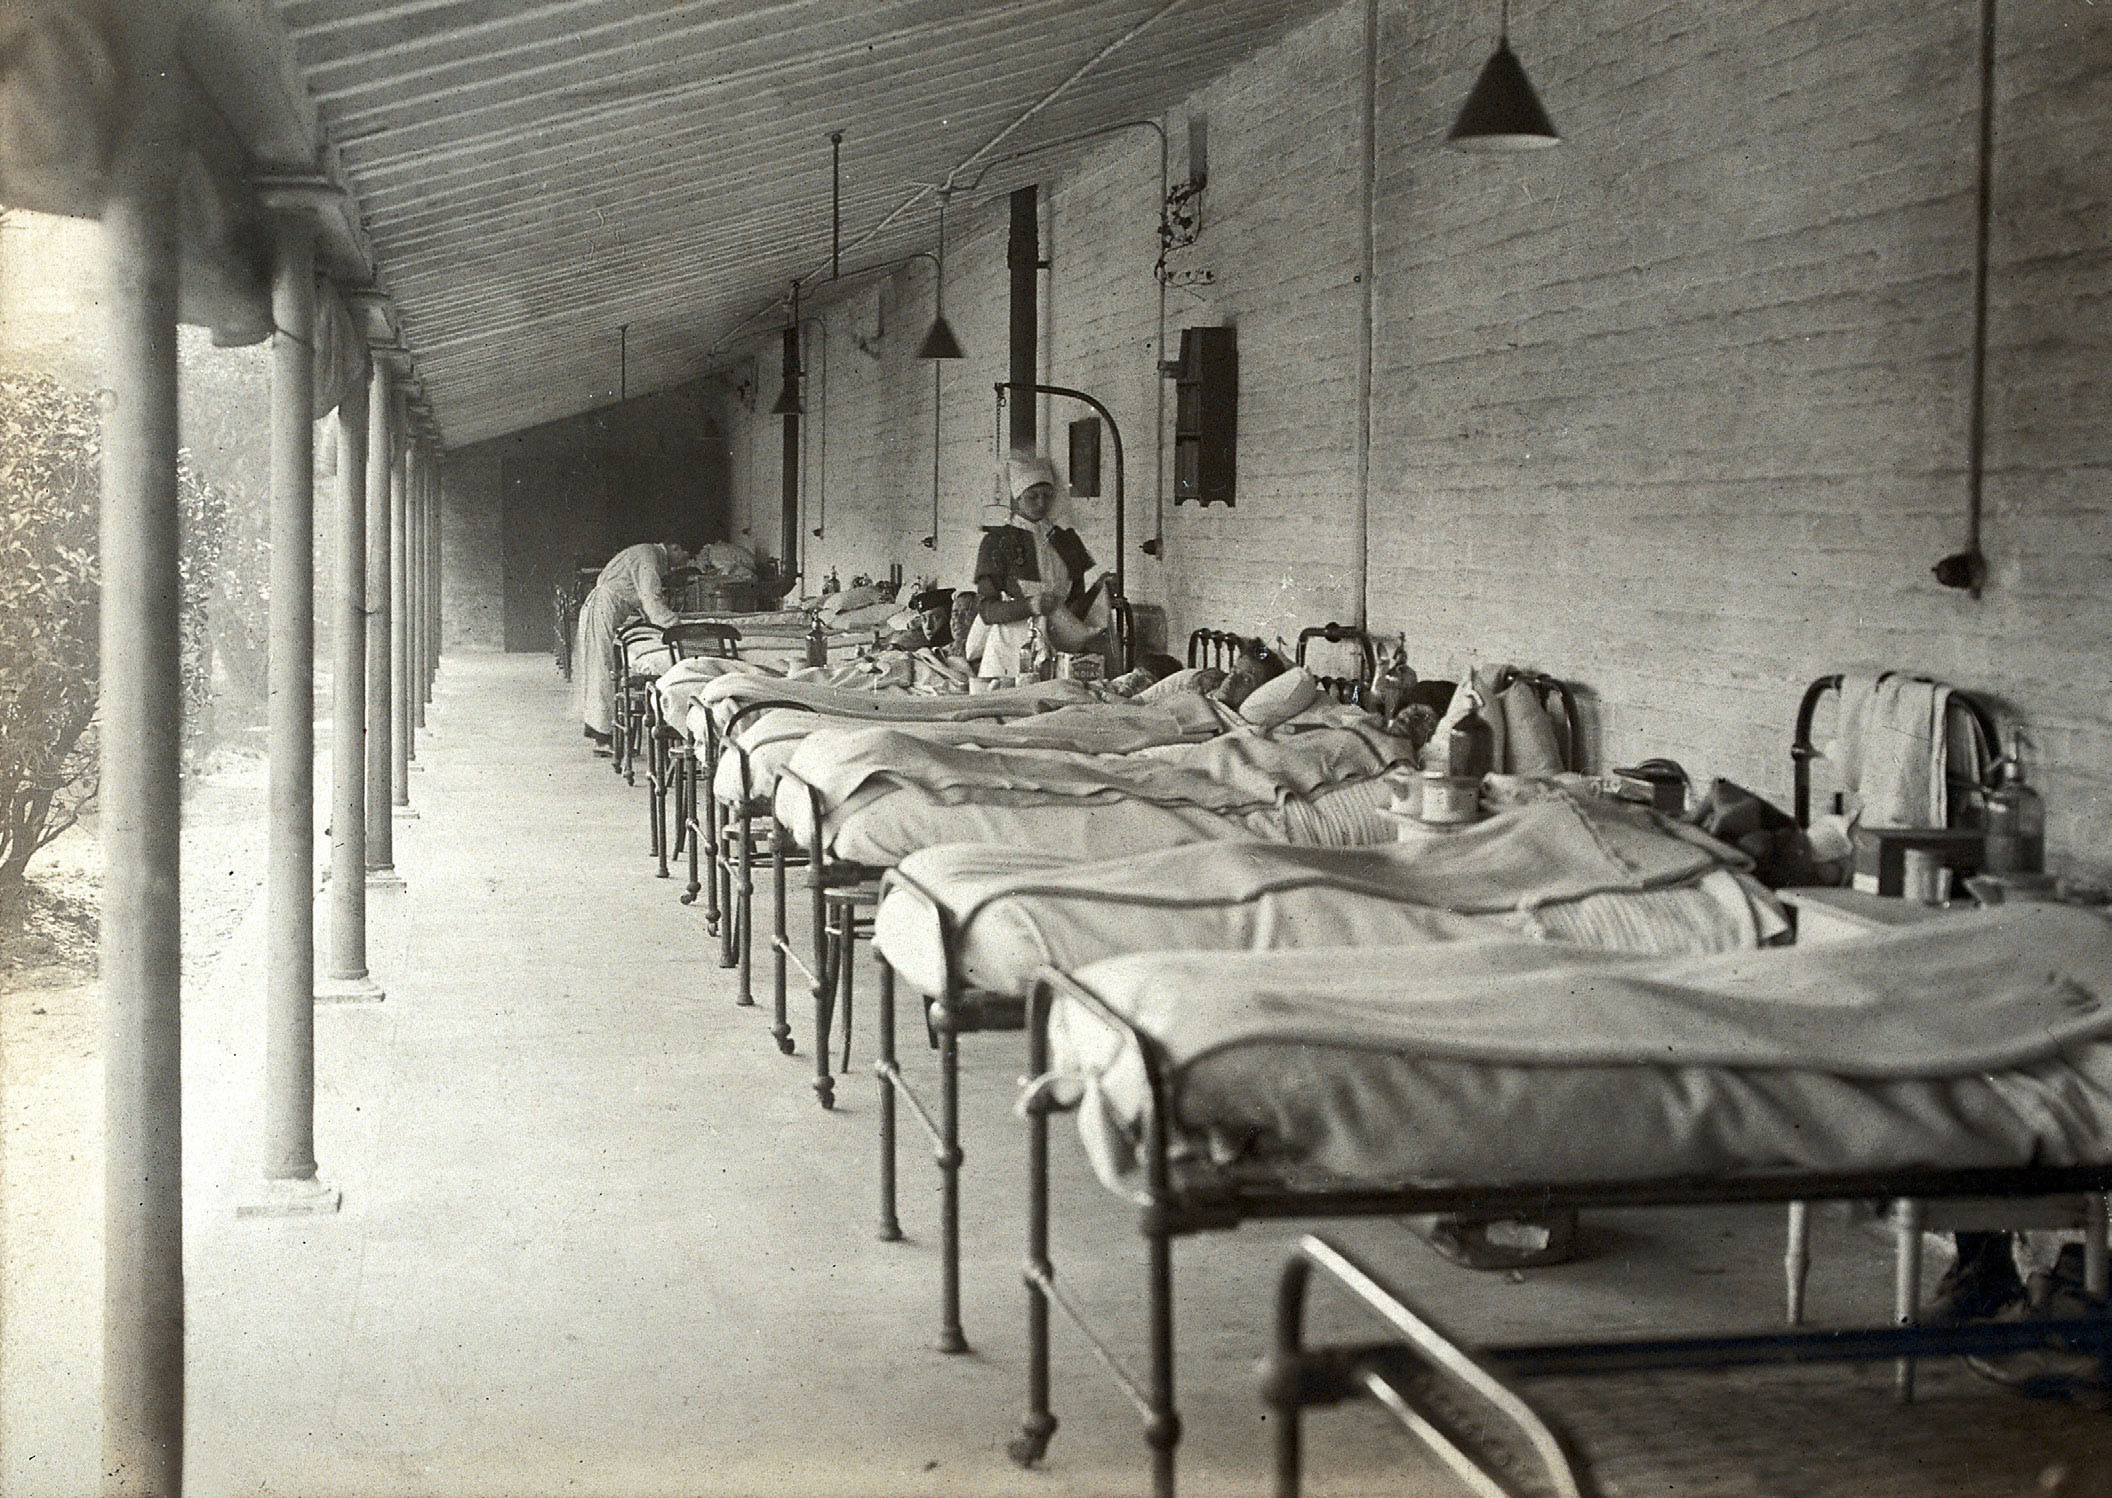 Vintage photograph of hospital beds in terrace